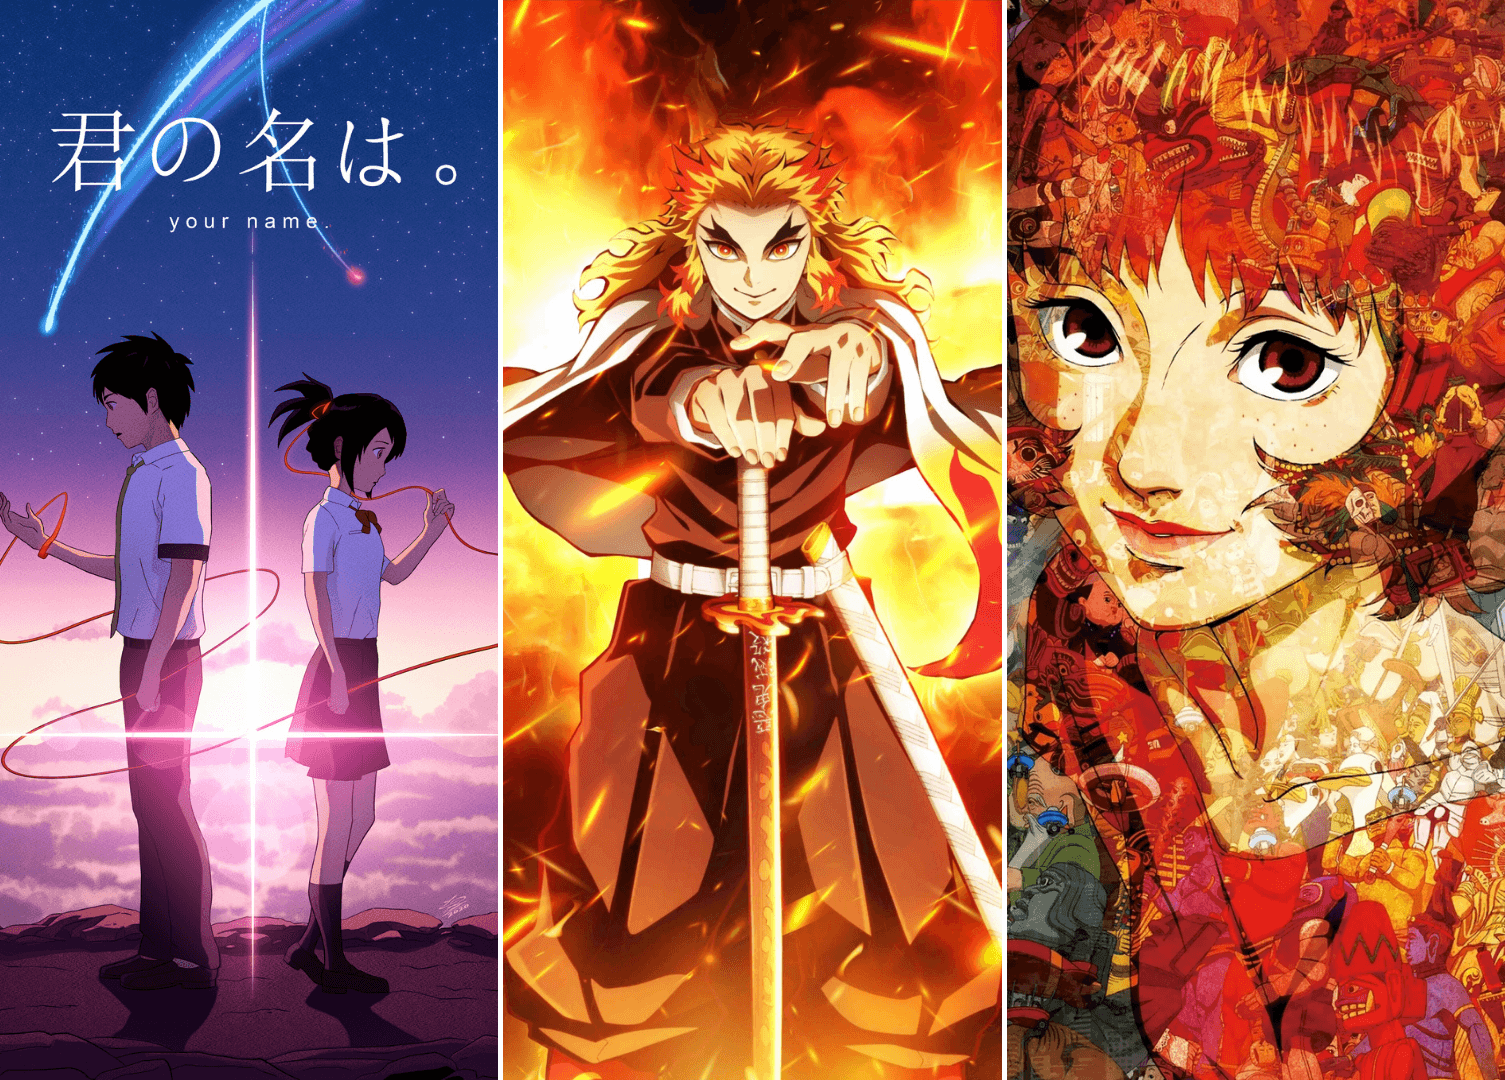 10 Anime Films That Deservesd The Oscar For 'Best Animated Feature'